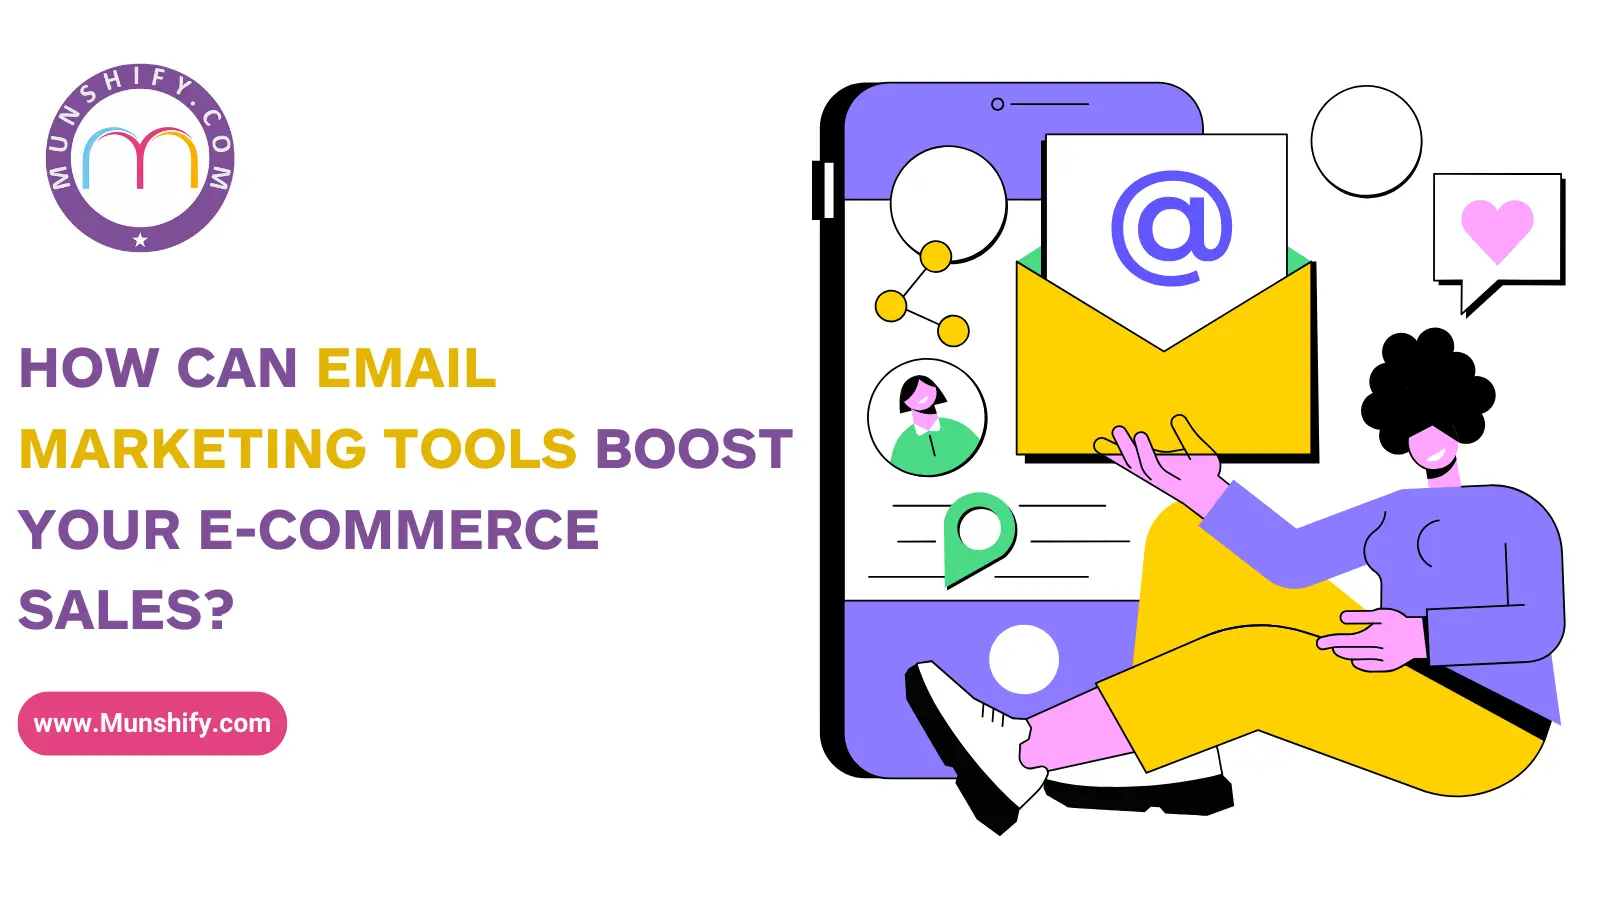 How Can Email Marketing Tools Boost Your E-commerce Sales?